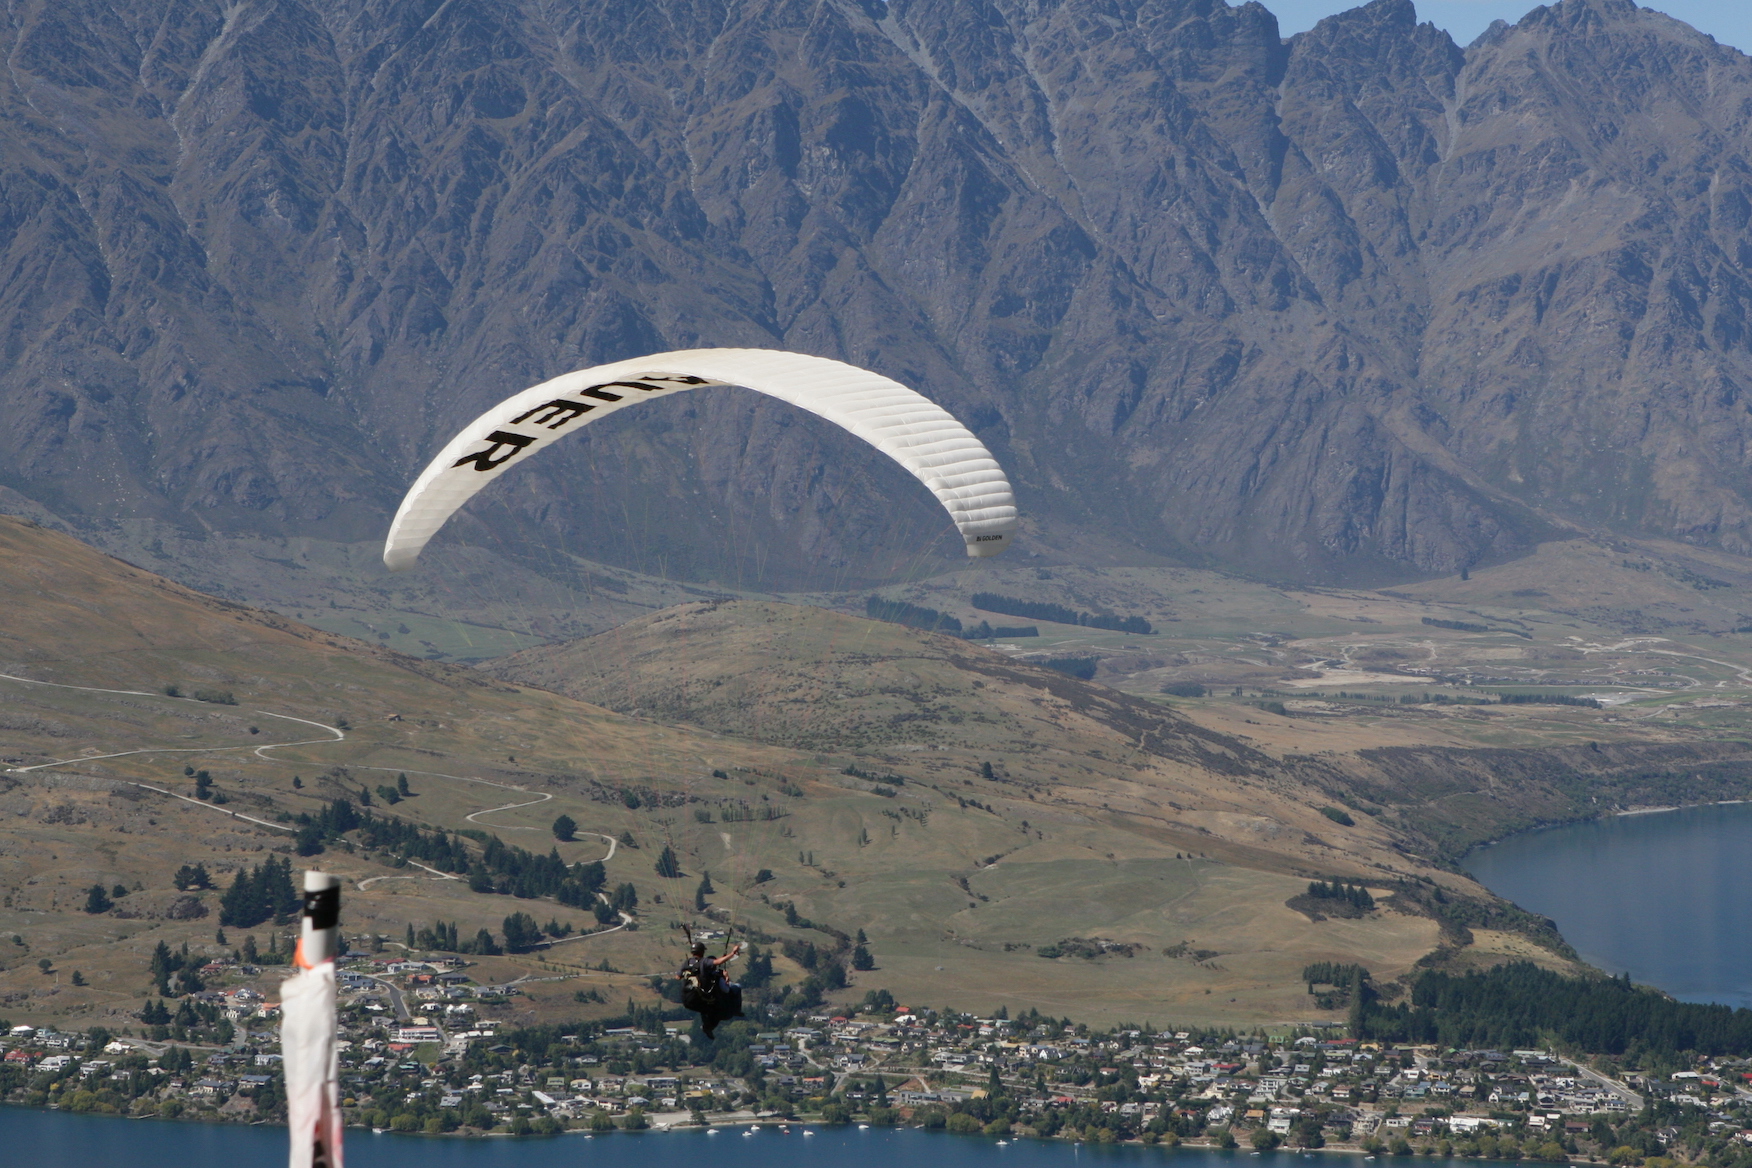 CLose up of paraglider